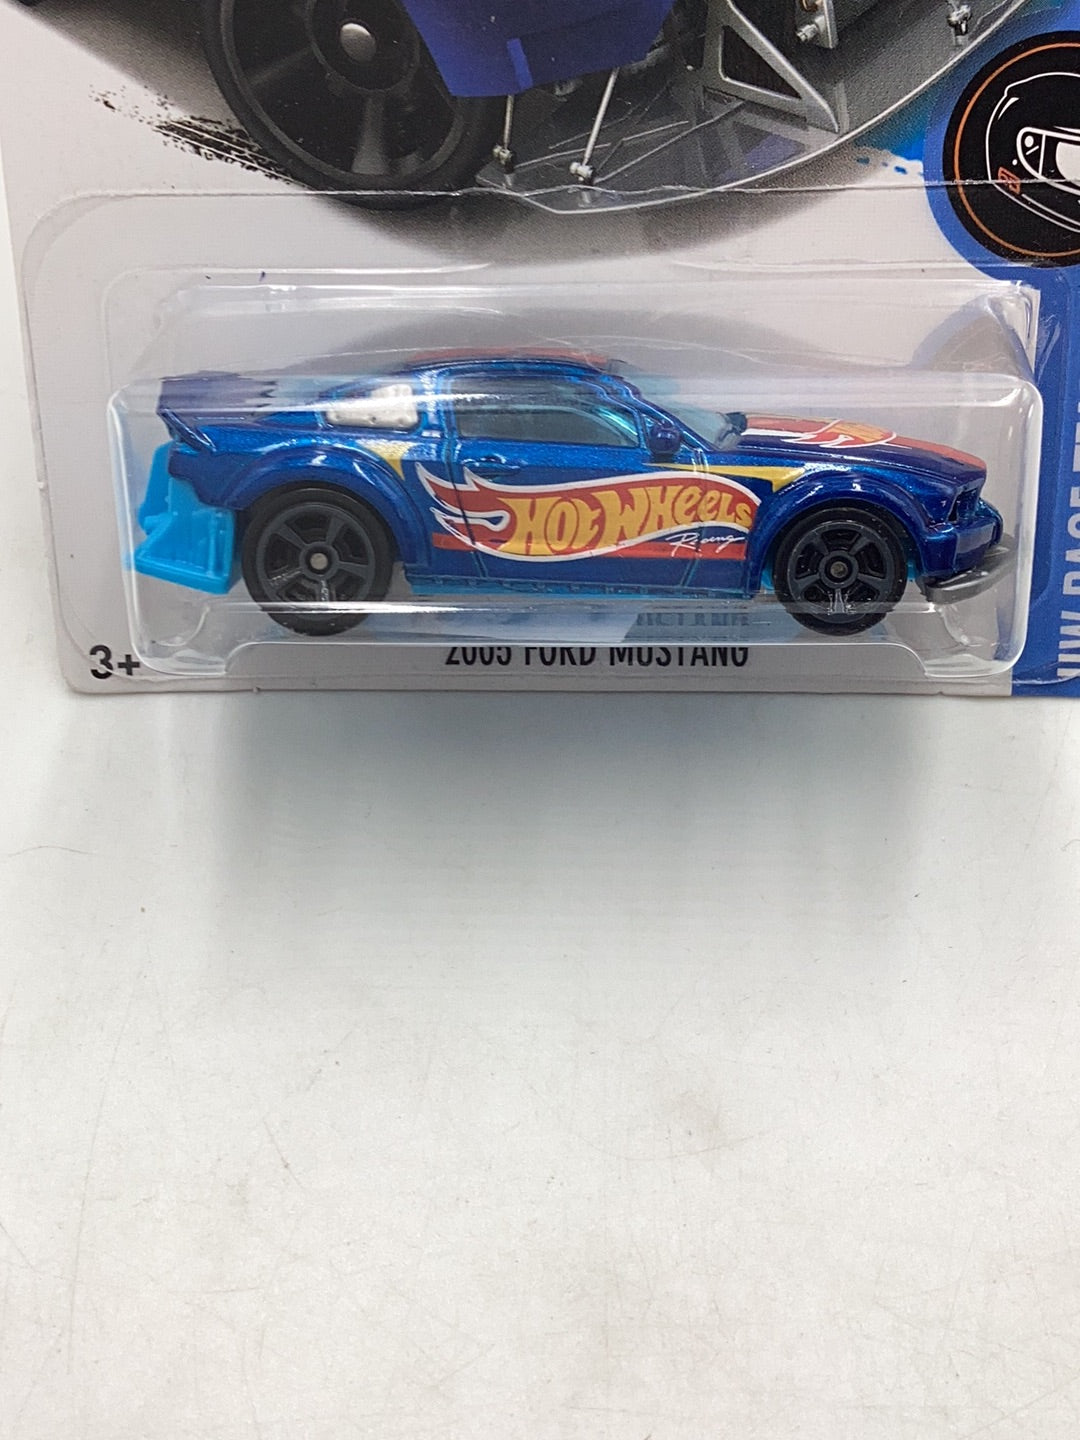 2017 Hot Wheels #280 2005 Ford Mustang 21E